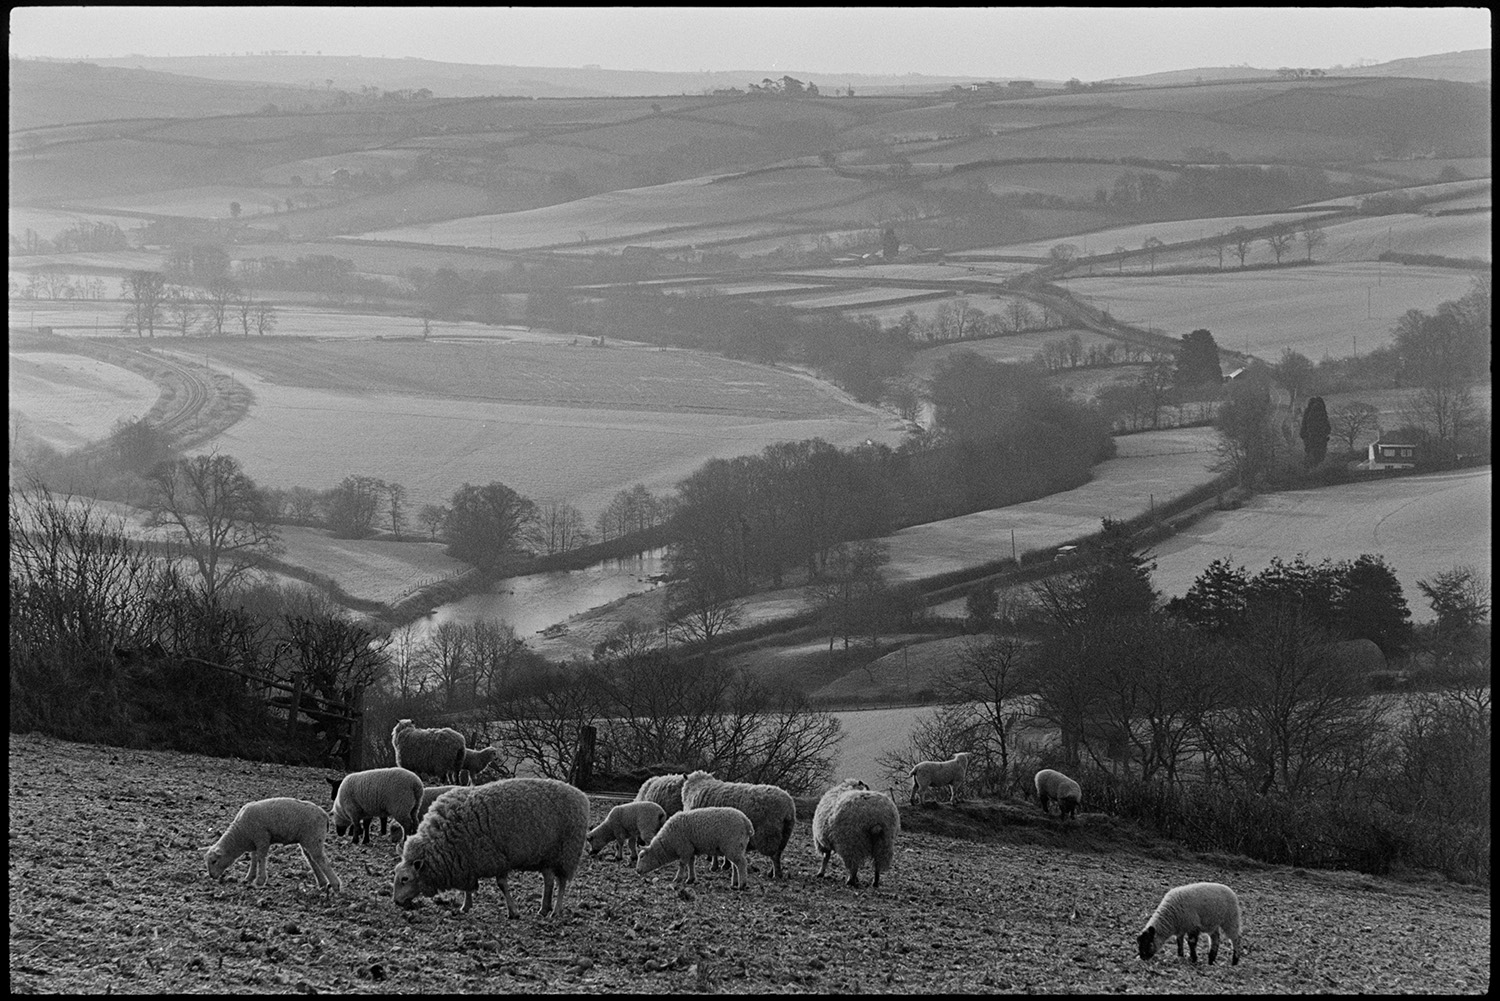 View over river valley with sheep, early morning.
[View of surrounding countryside with fields, hedgerows and the River Taw taken from Fisherton Farm, Atherington, in the early morning. A flock of sheep grazing in a field in the foreground.]